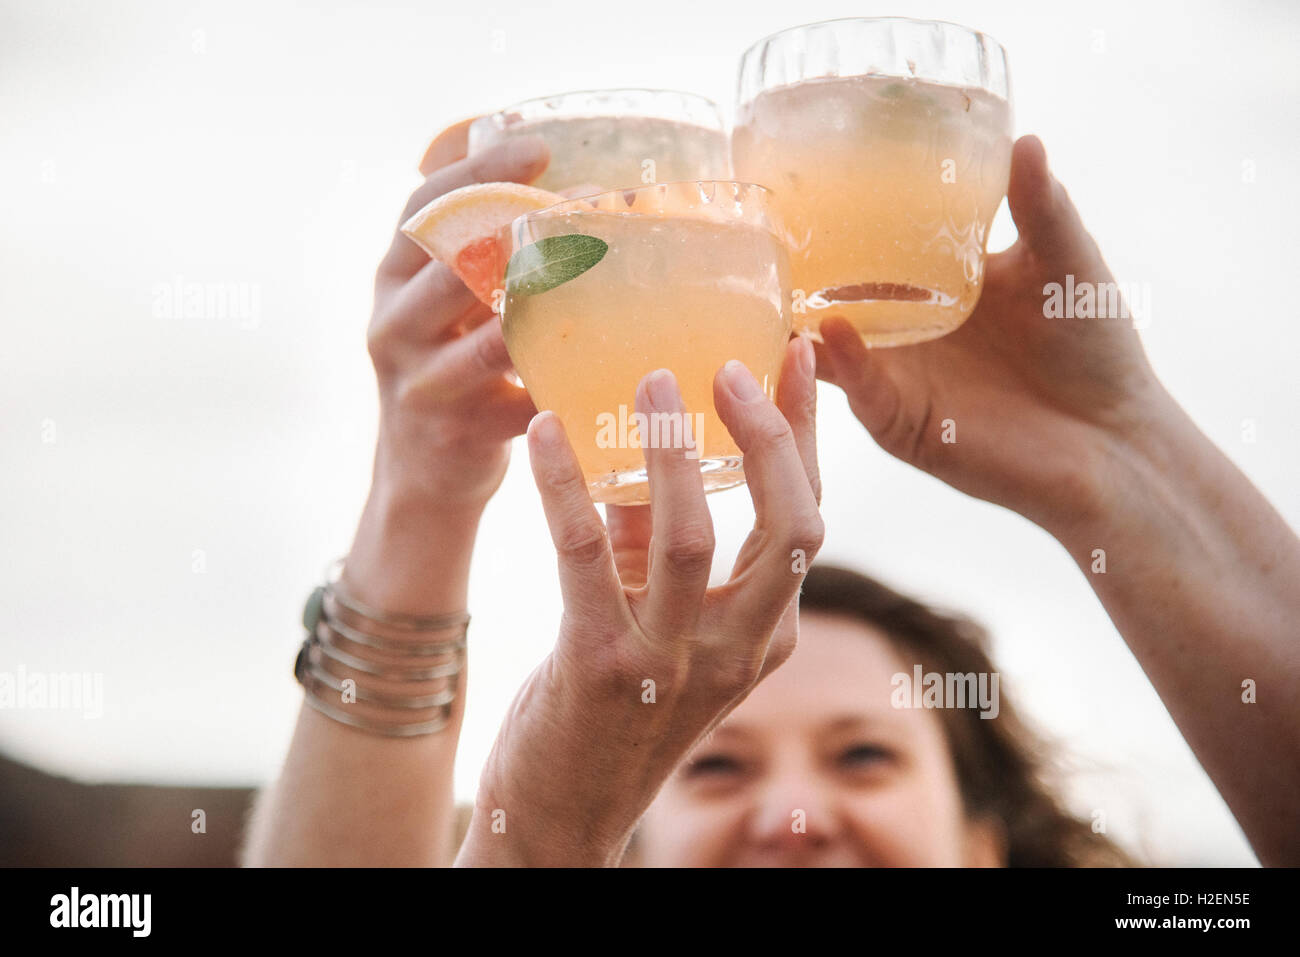 Three women standing in a desert landscape toasting each other.  Raising glasses. Stock Photo